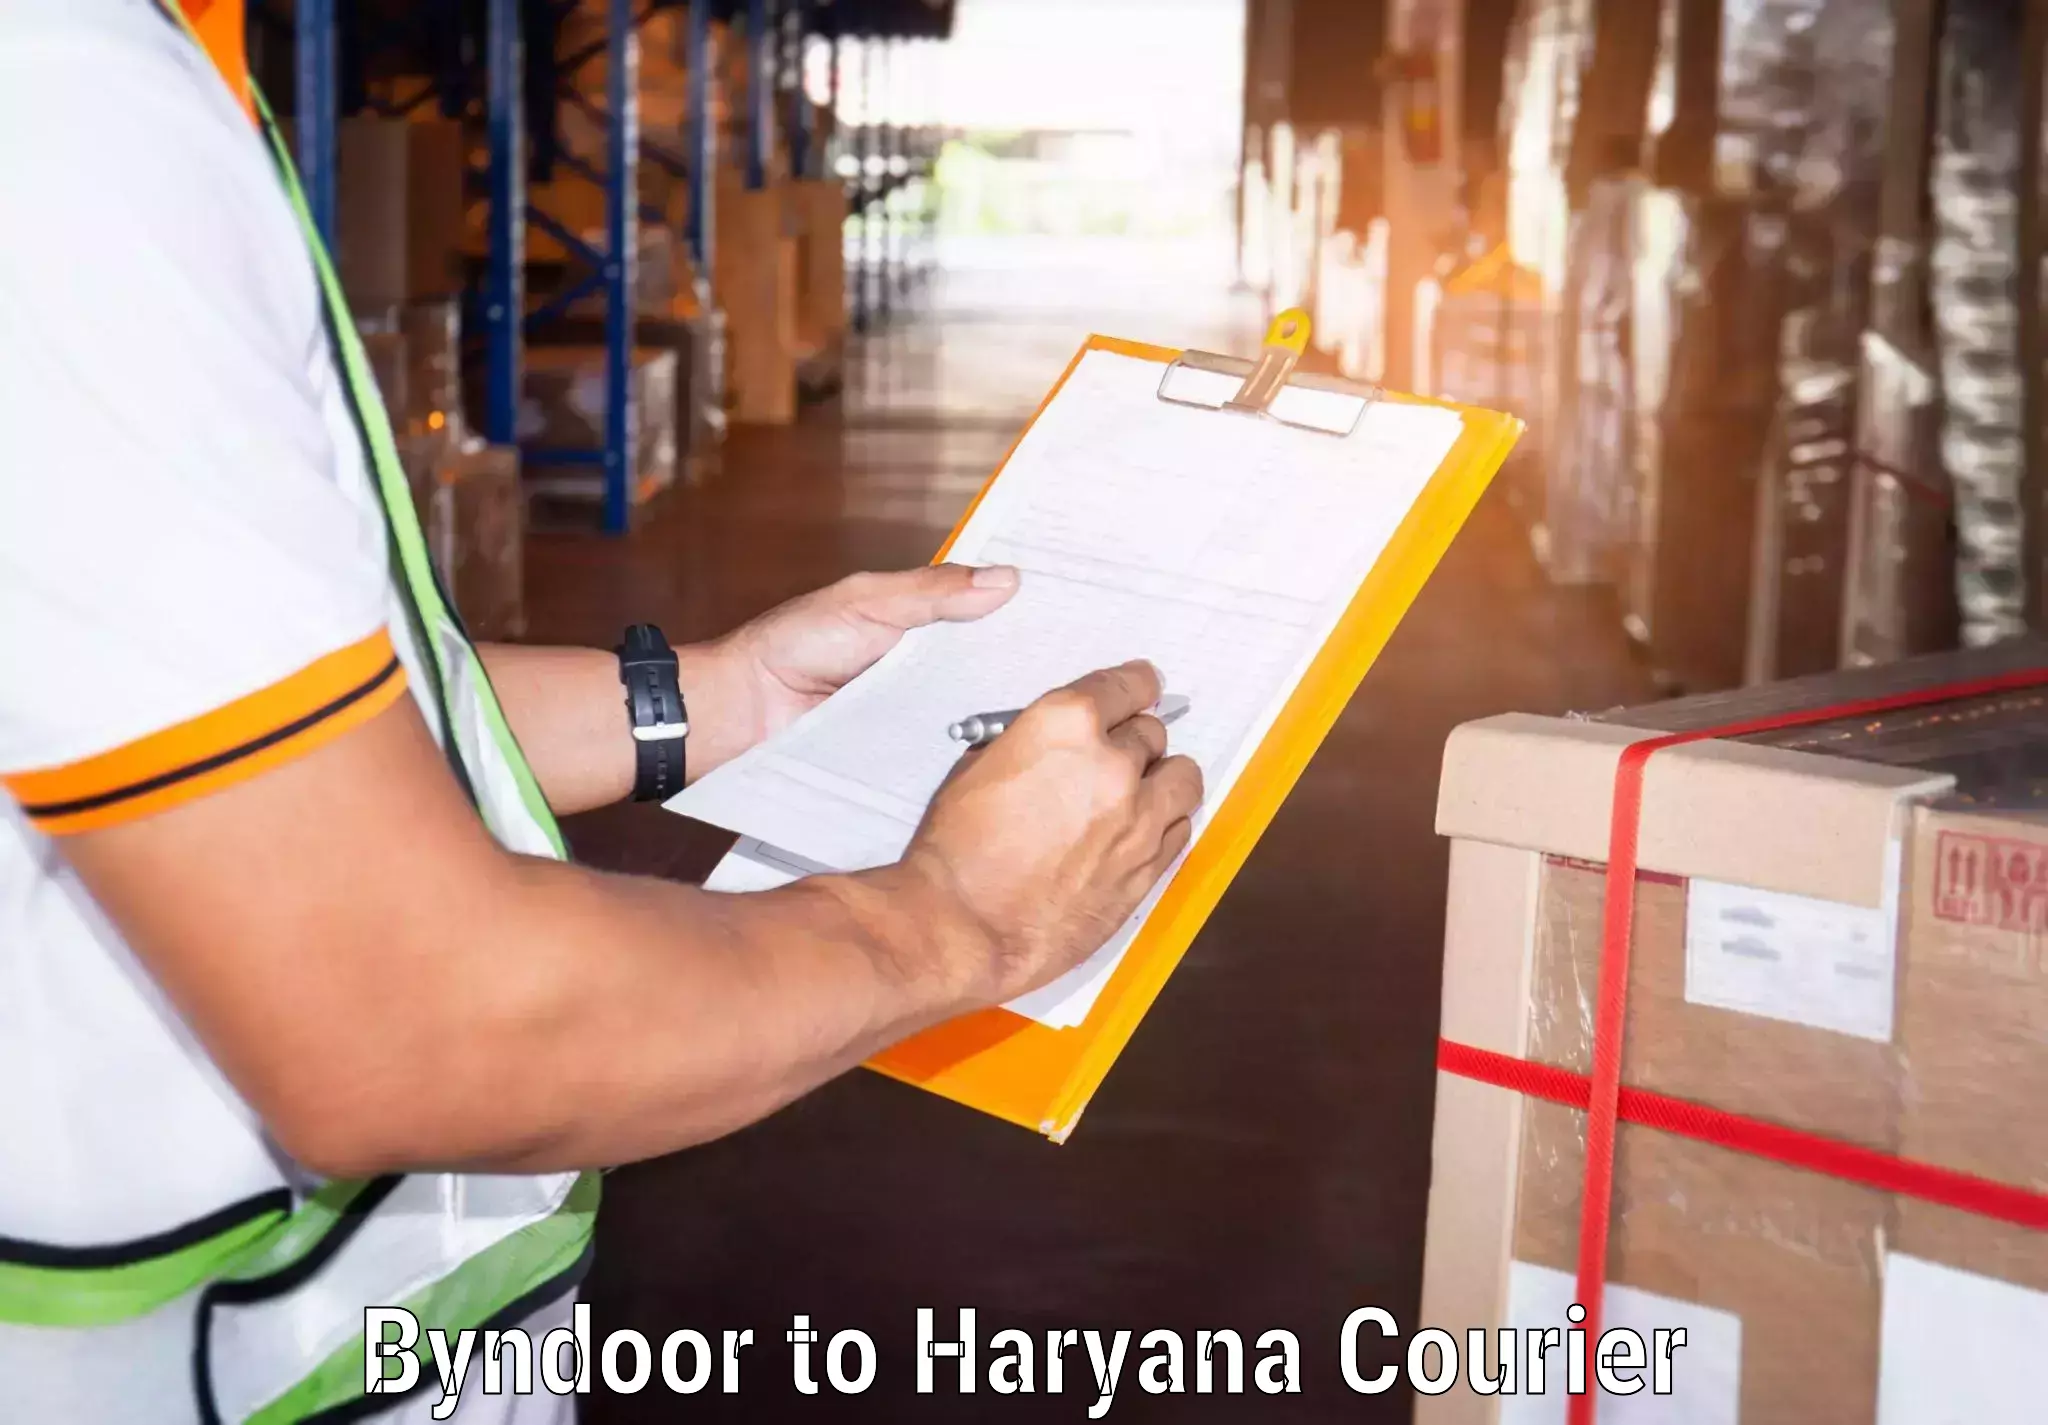 Courier service comparison Byndoor to Jhajjar